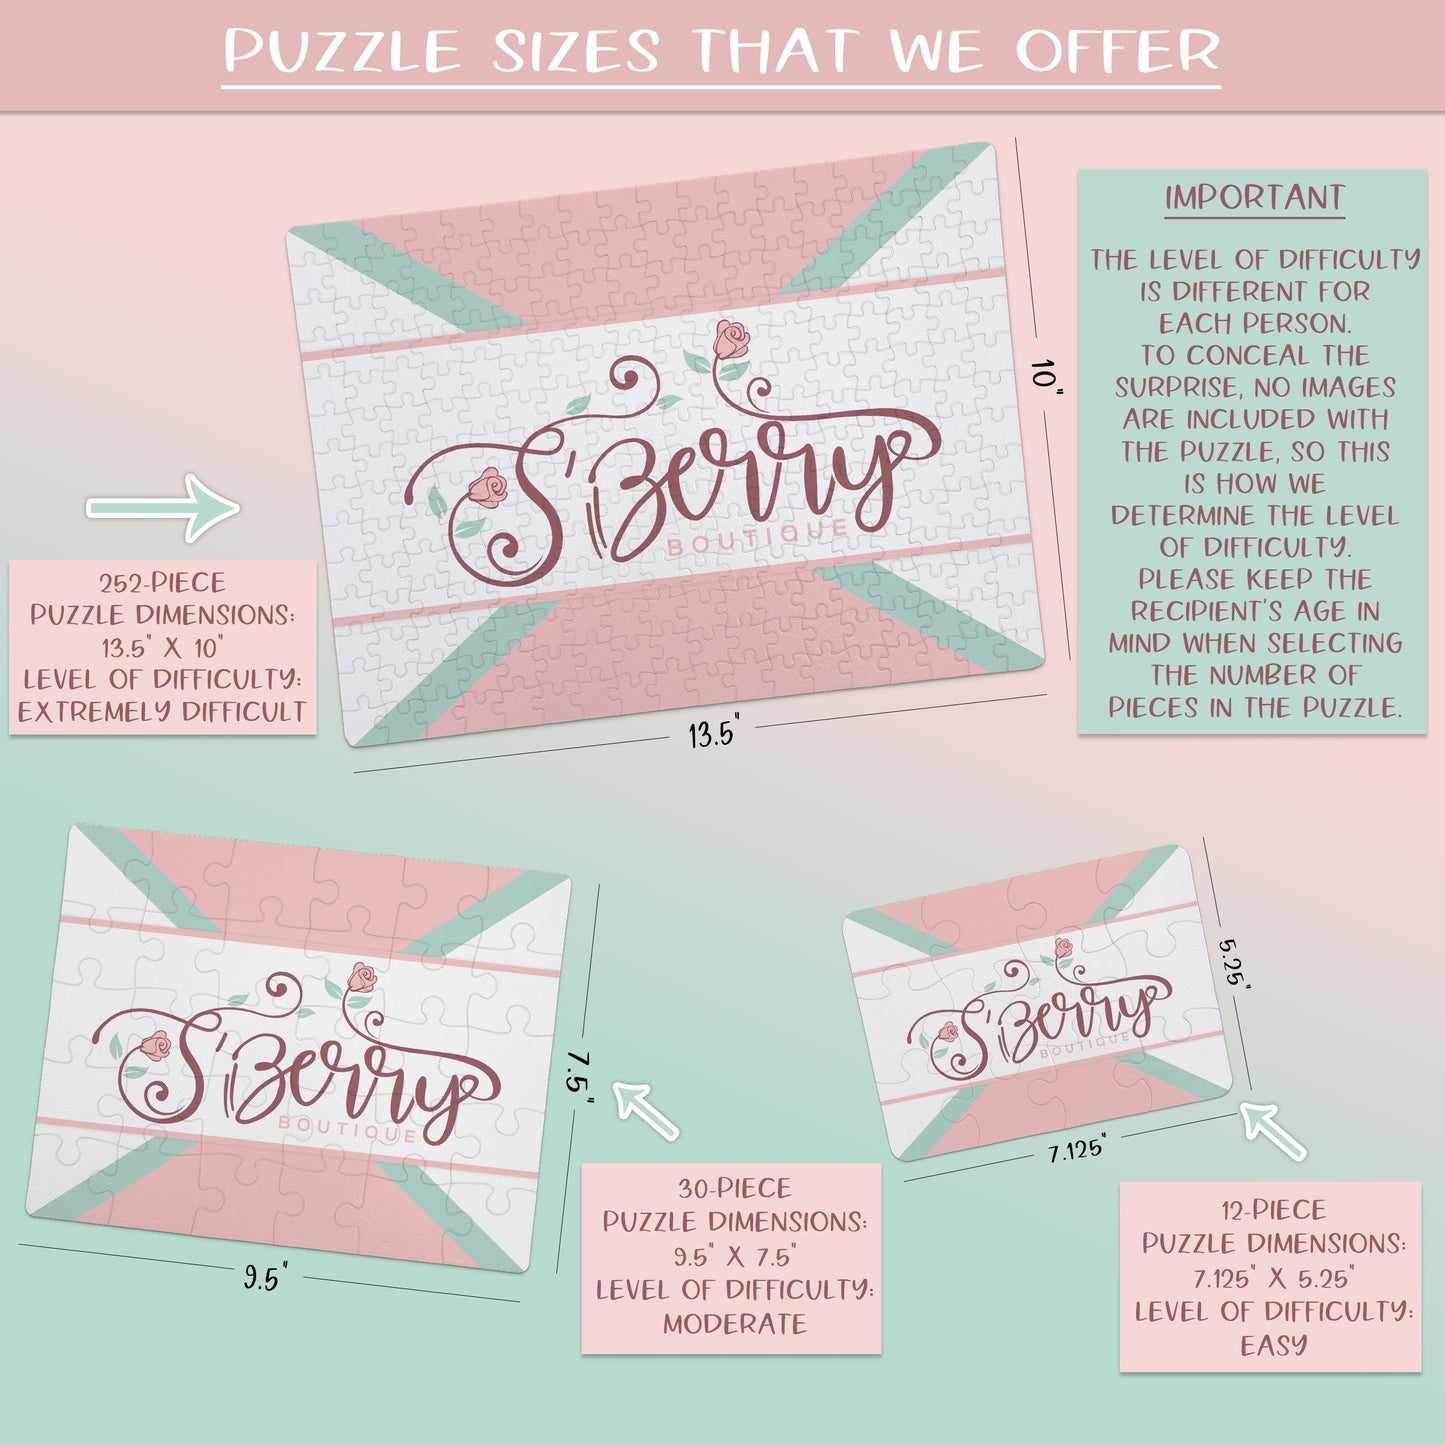 Create Your Own Puzzle - Sports Design - Baseball - CYOP0262 | S'Berry Boutique